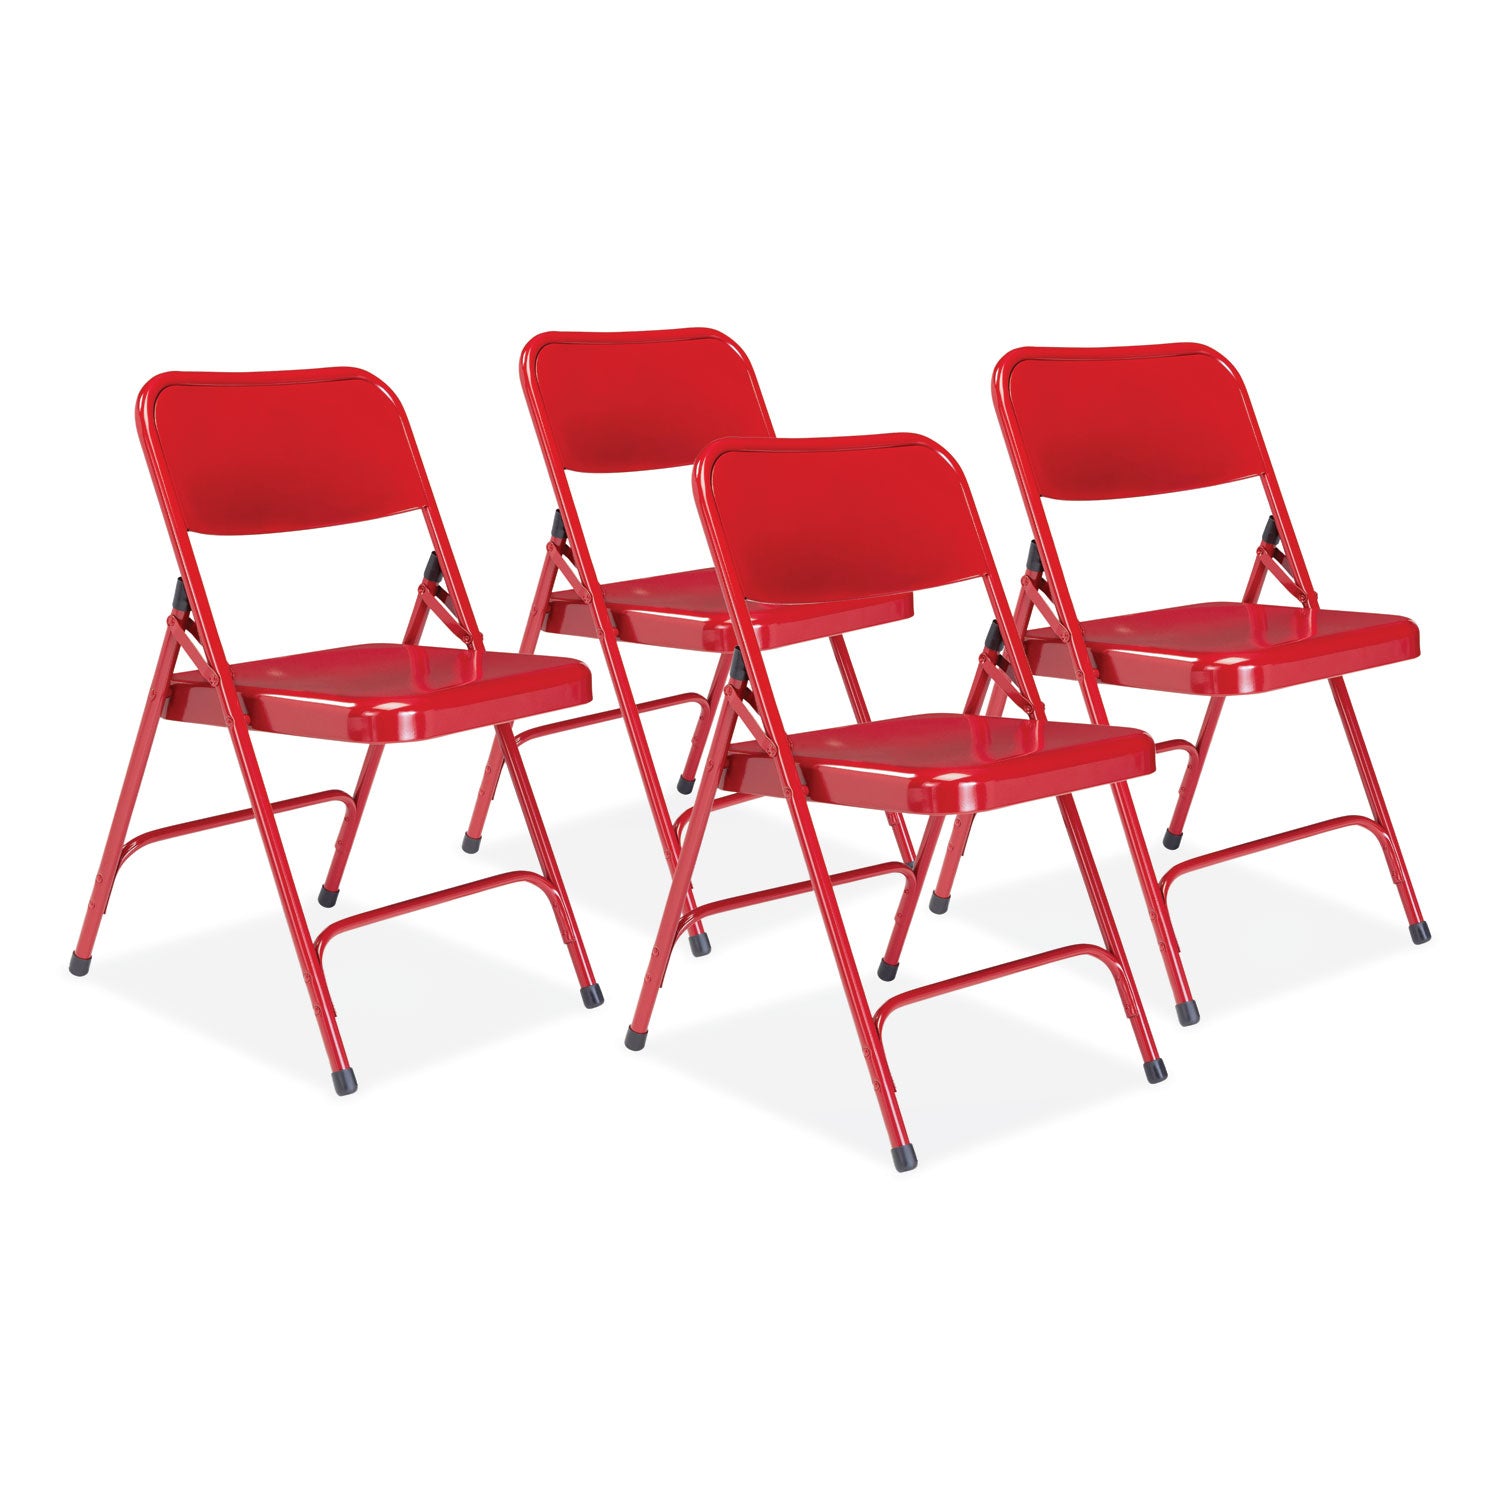 200-series-premium-all-steel-double-hinge-folding-chair-supports-500-lb-1725-seat-height-red-4-ctships-in-1-3-bus-days_nps240 - 1